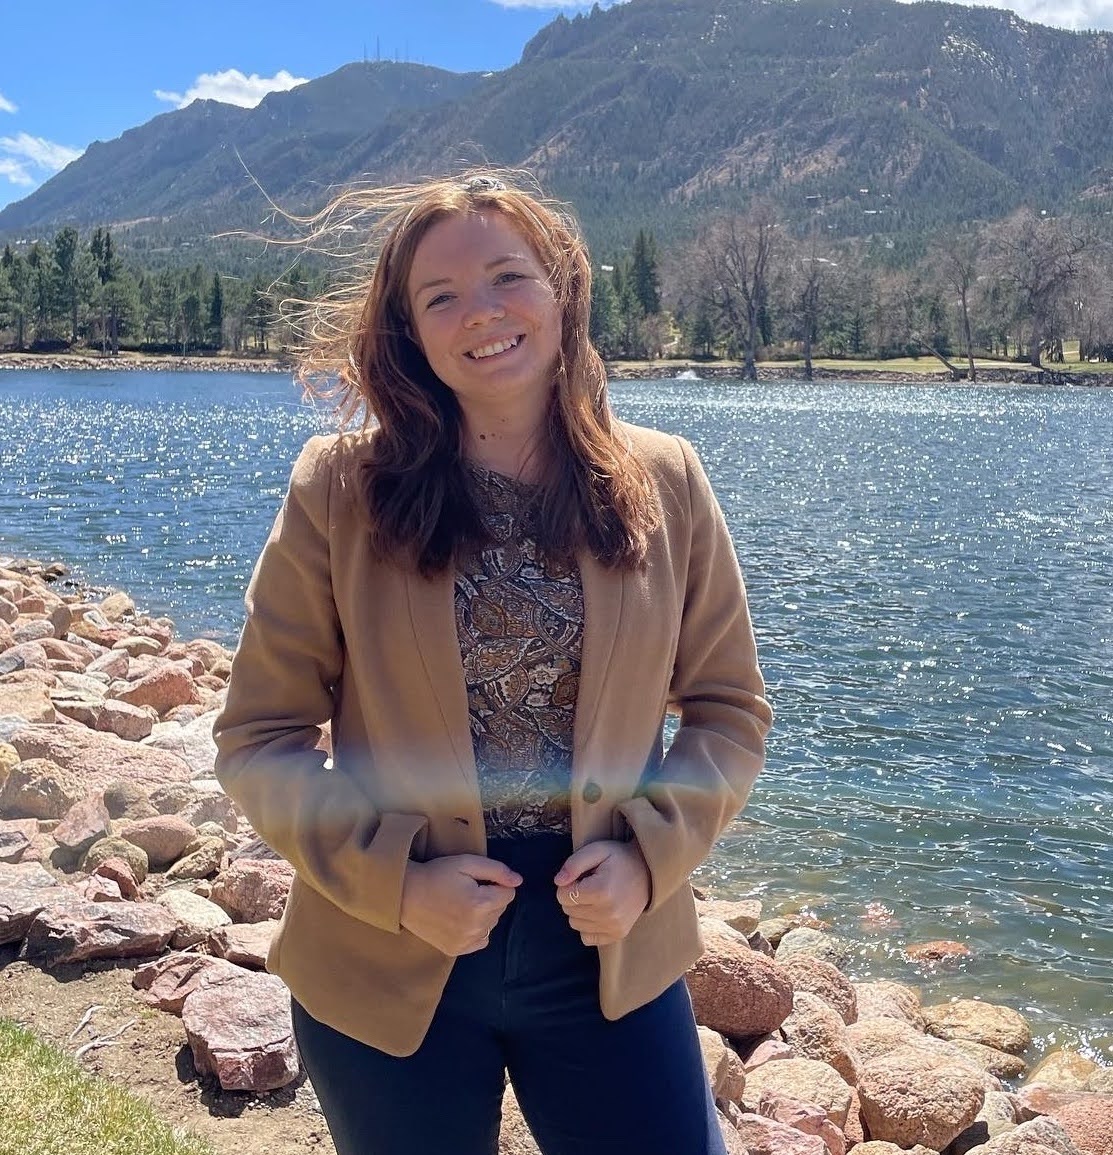 A headshot of Lindsey, standing in front of a lake and wearing professional attire.